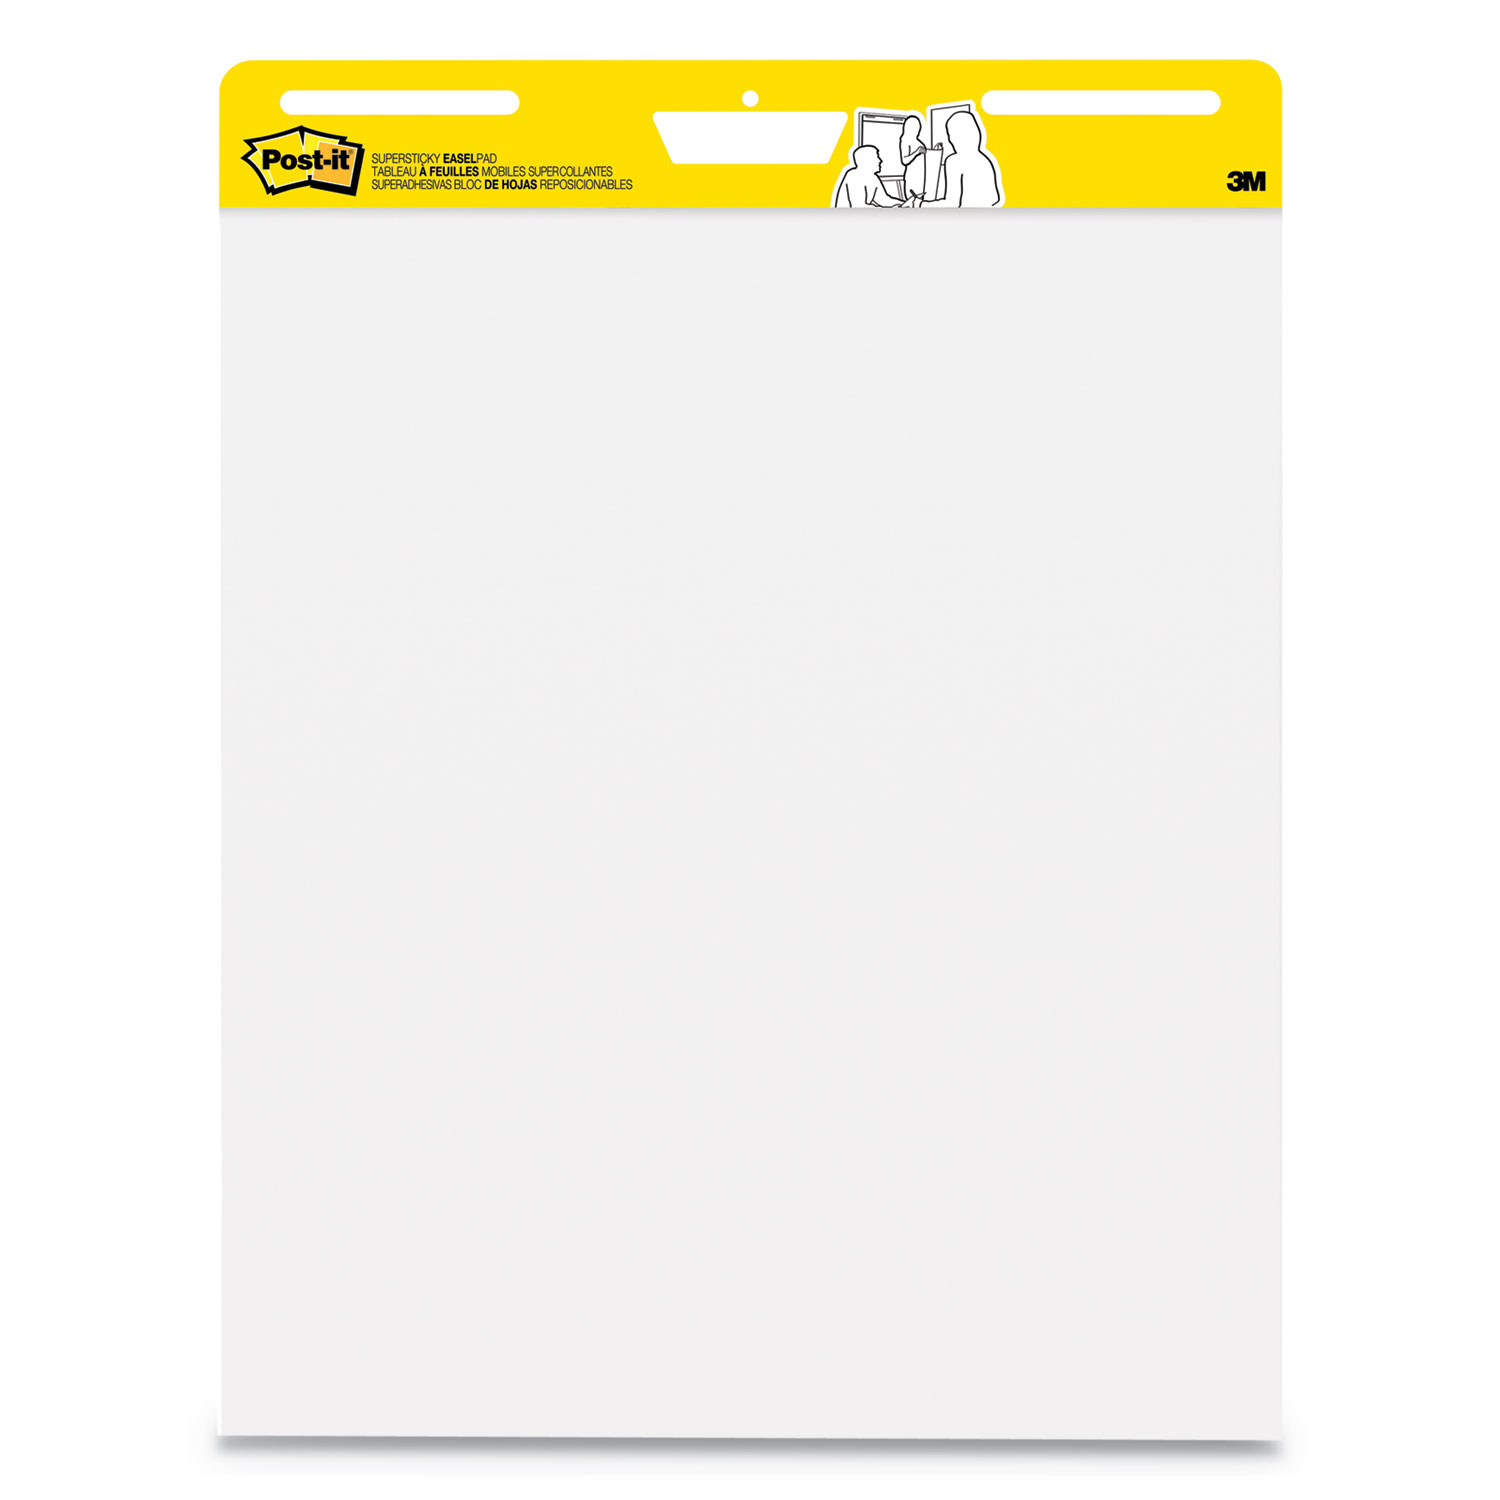  Post-it Easel Pads Super Sticky 559 STB Self-Stick Wall Pad, 25 x 30, White, 30 Sheets, 2/Carton (MMM559STB) 